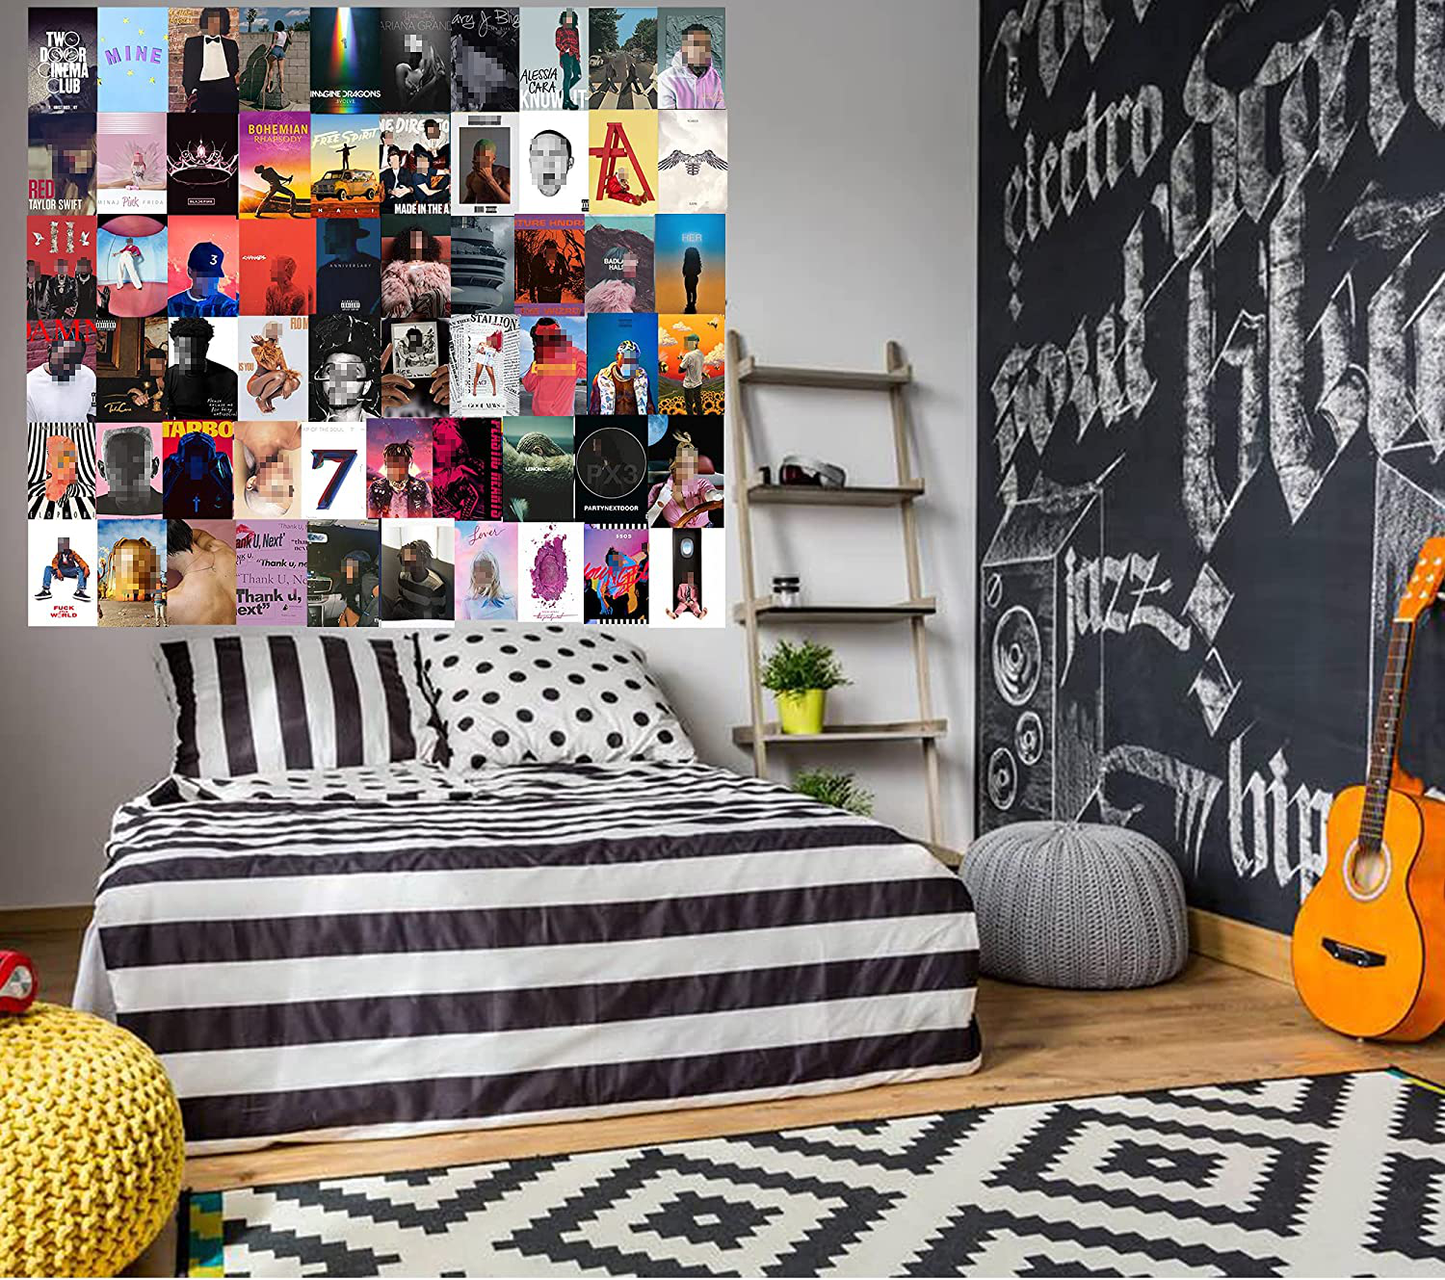 Adzt's 70PCS Album Cover Aesthetic Pictures Wall Collage Kit, Album Style Photo Collection Collage VSCO Bedroom Dorm Decor for Girl and Boy Teens, Trendy Wall Prints Kit, Small Poster for Room Bedroom Aesthetic